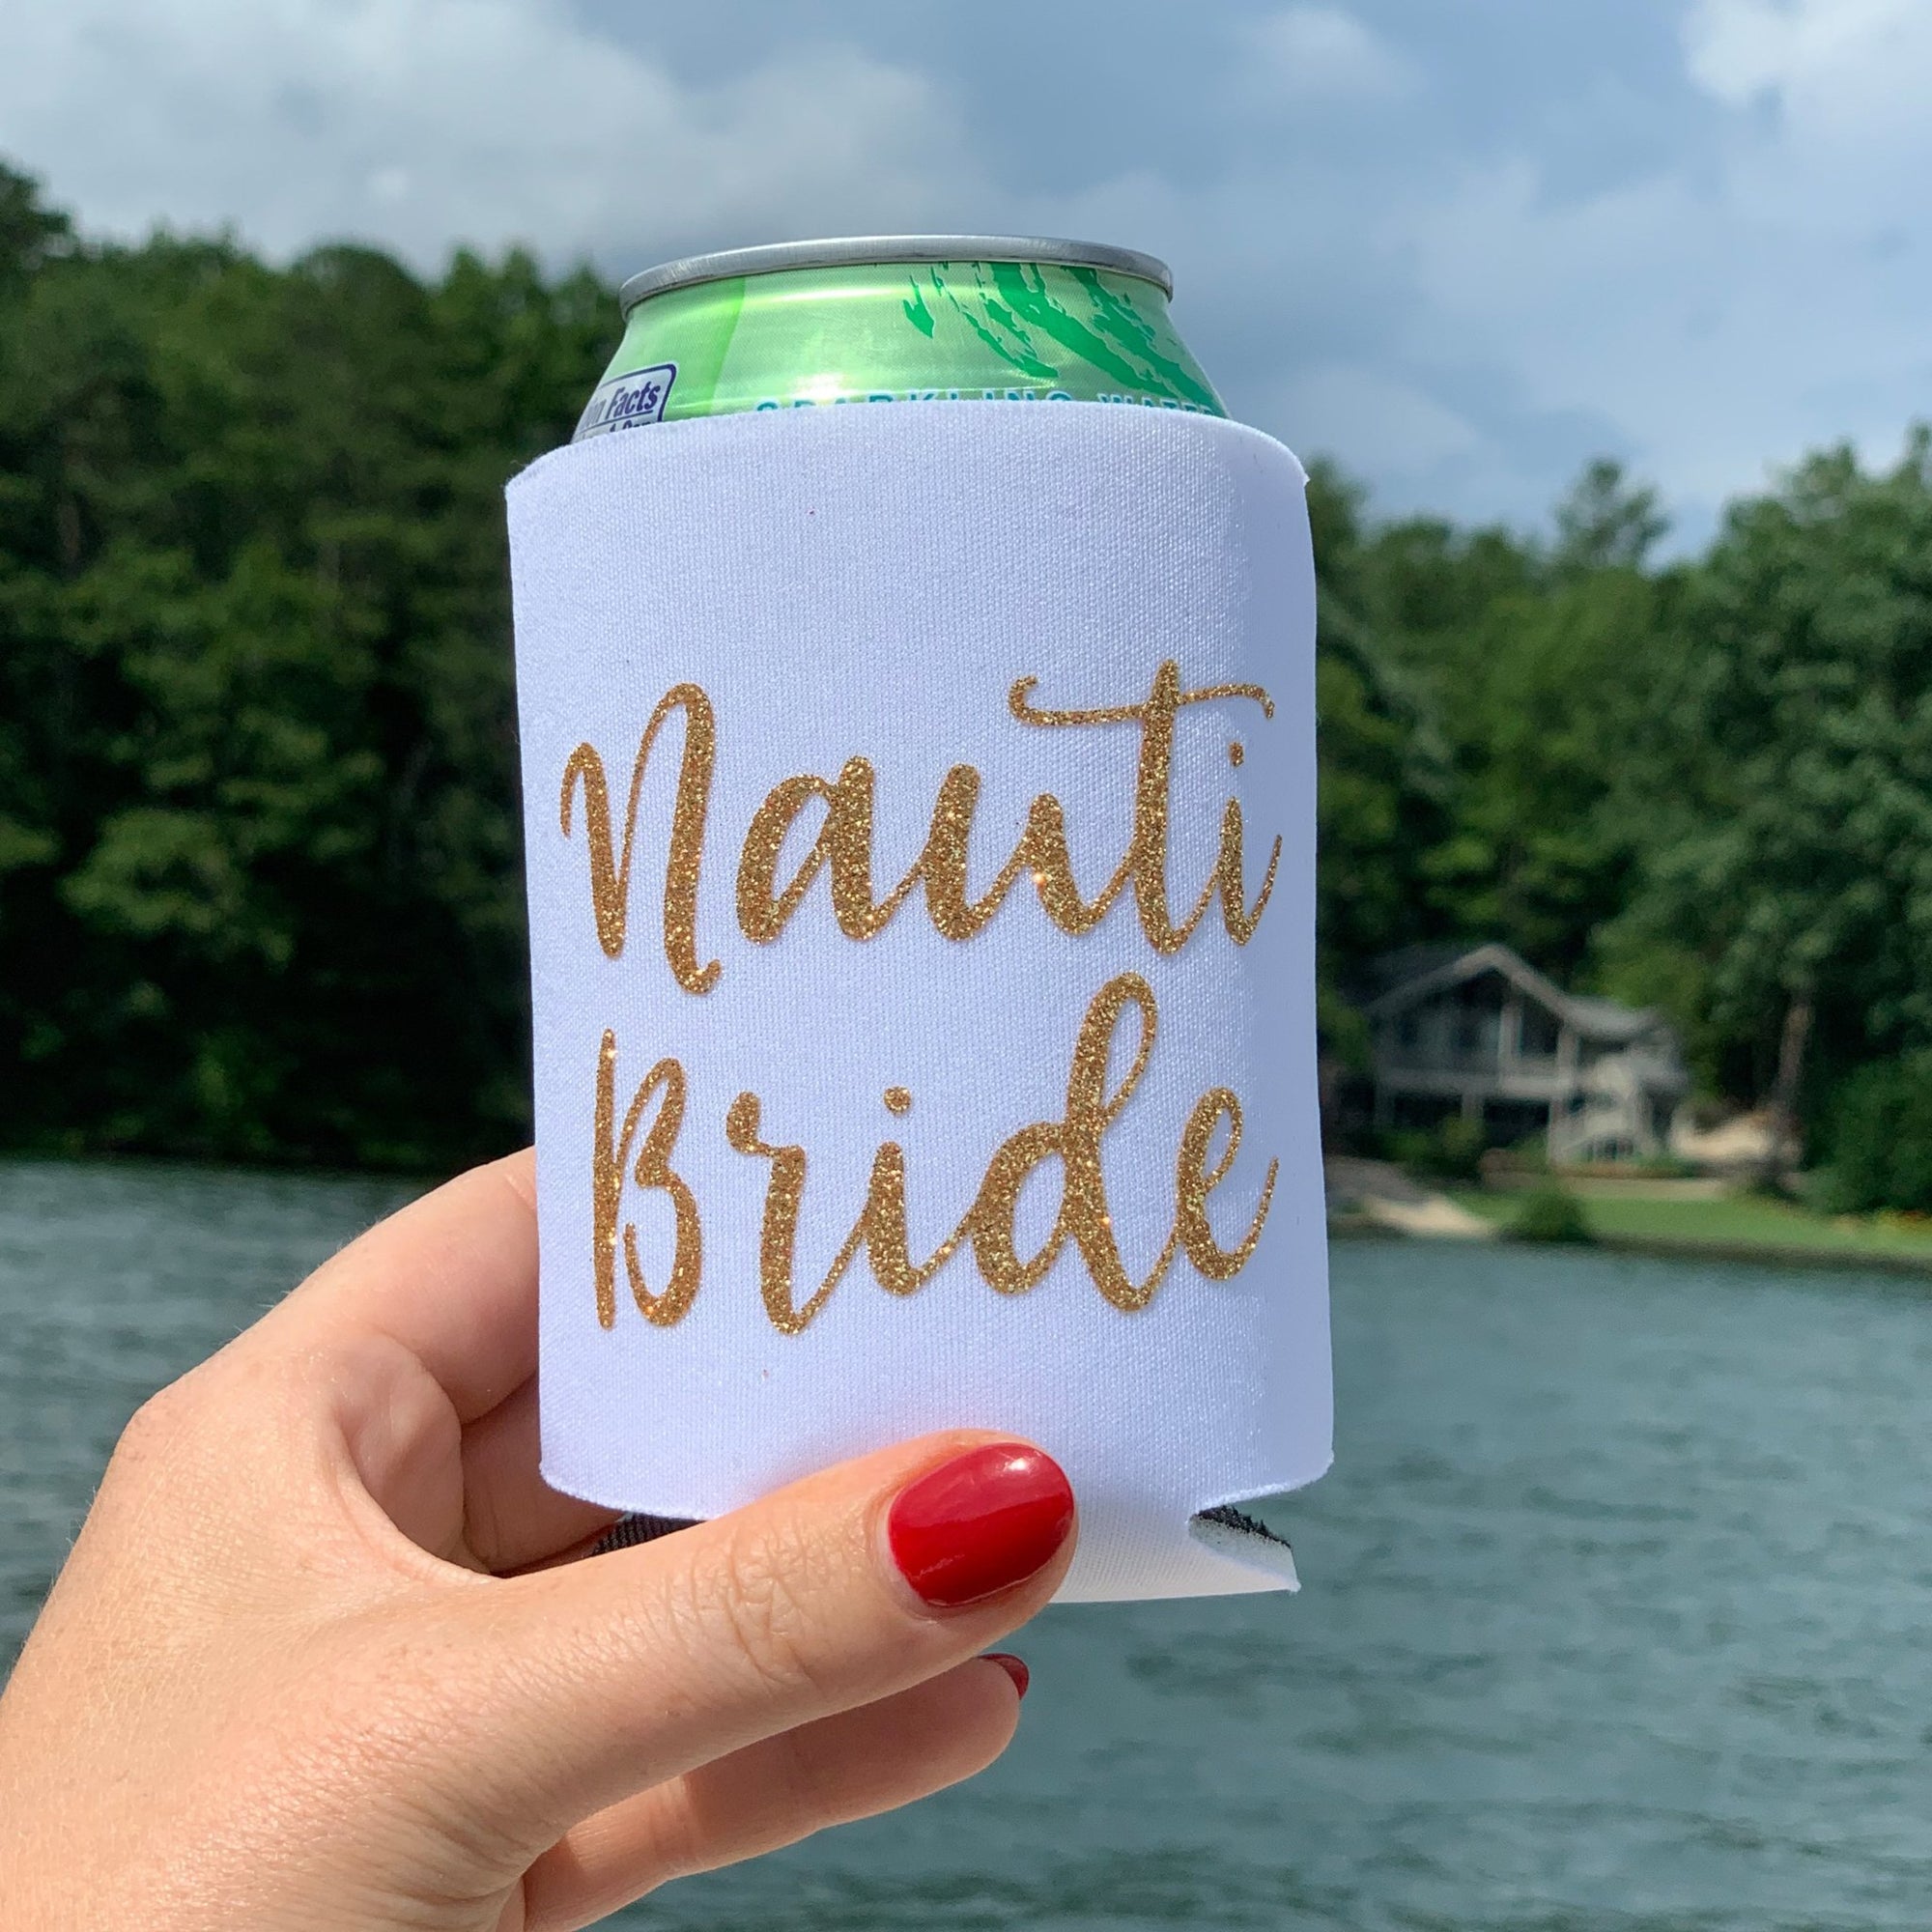 A woman holds up a white can cooler which says "Nauti Bride" in a gold glitter font.